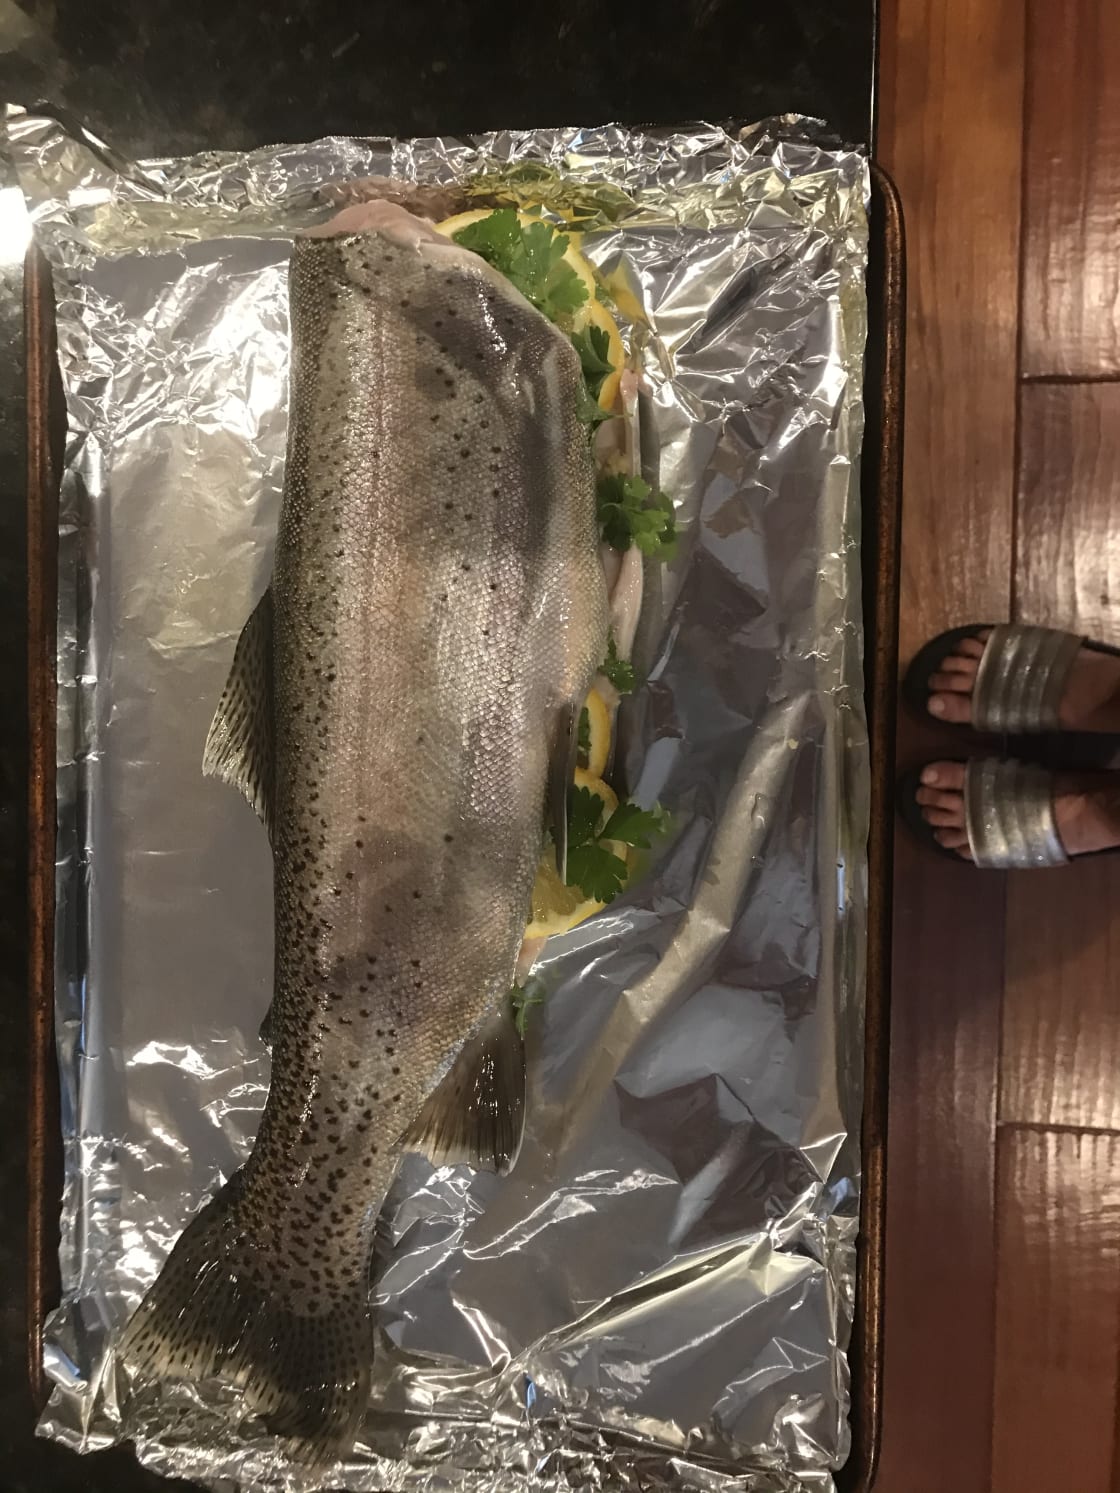 We bought fresh trout